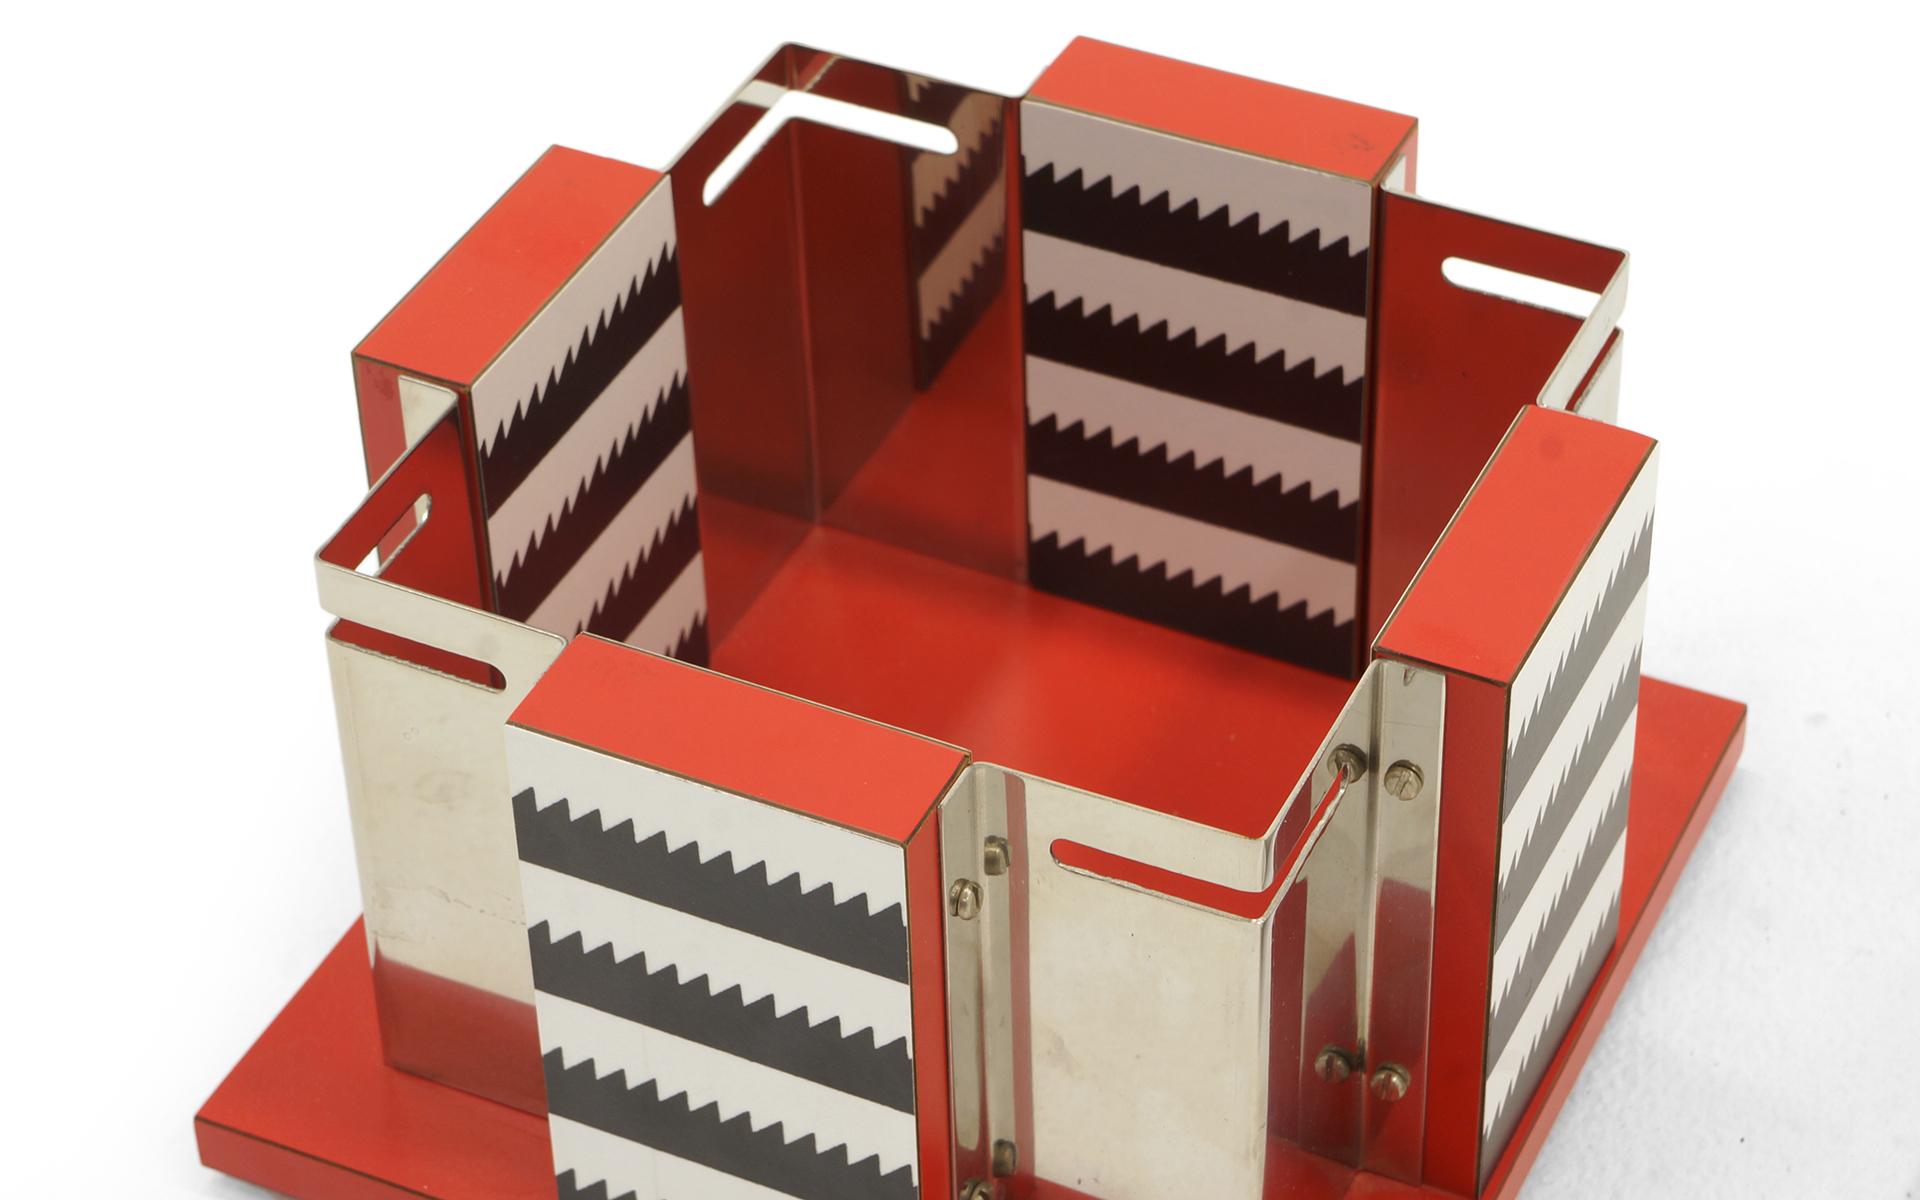 Lacquered Gracieux Accueil Box from Objects for the Electronic Age by Nathalie du Pasquier